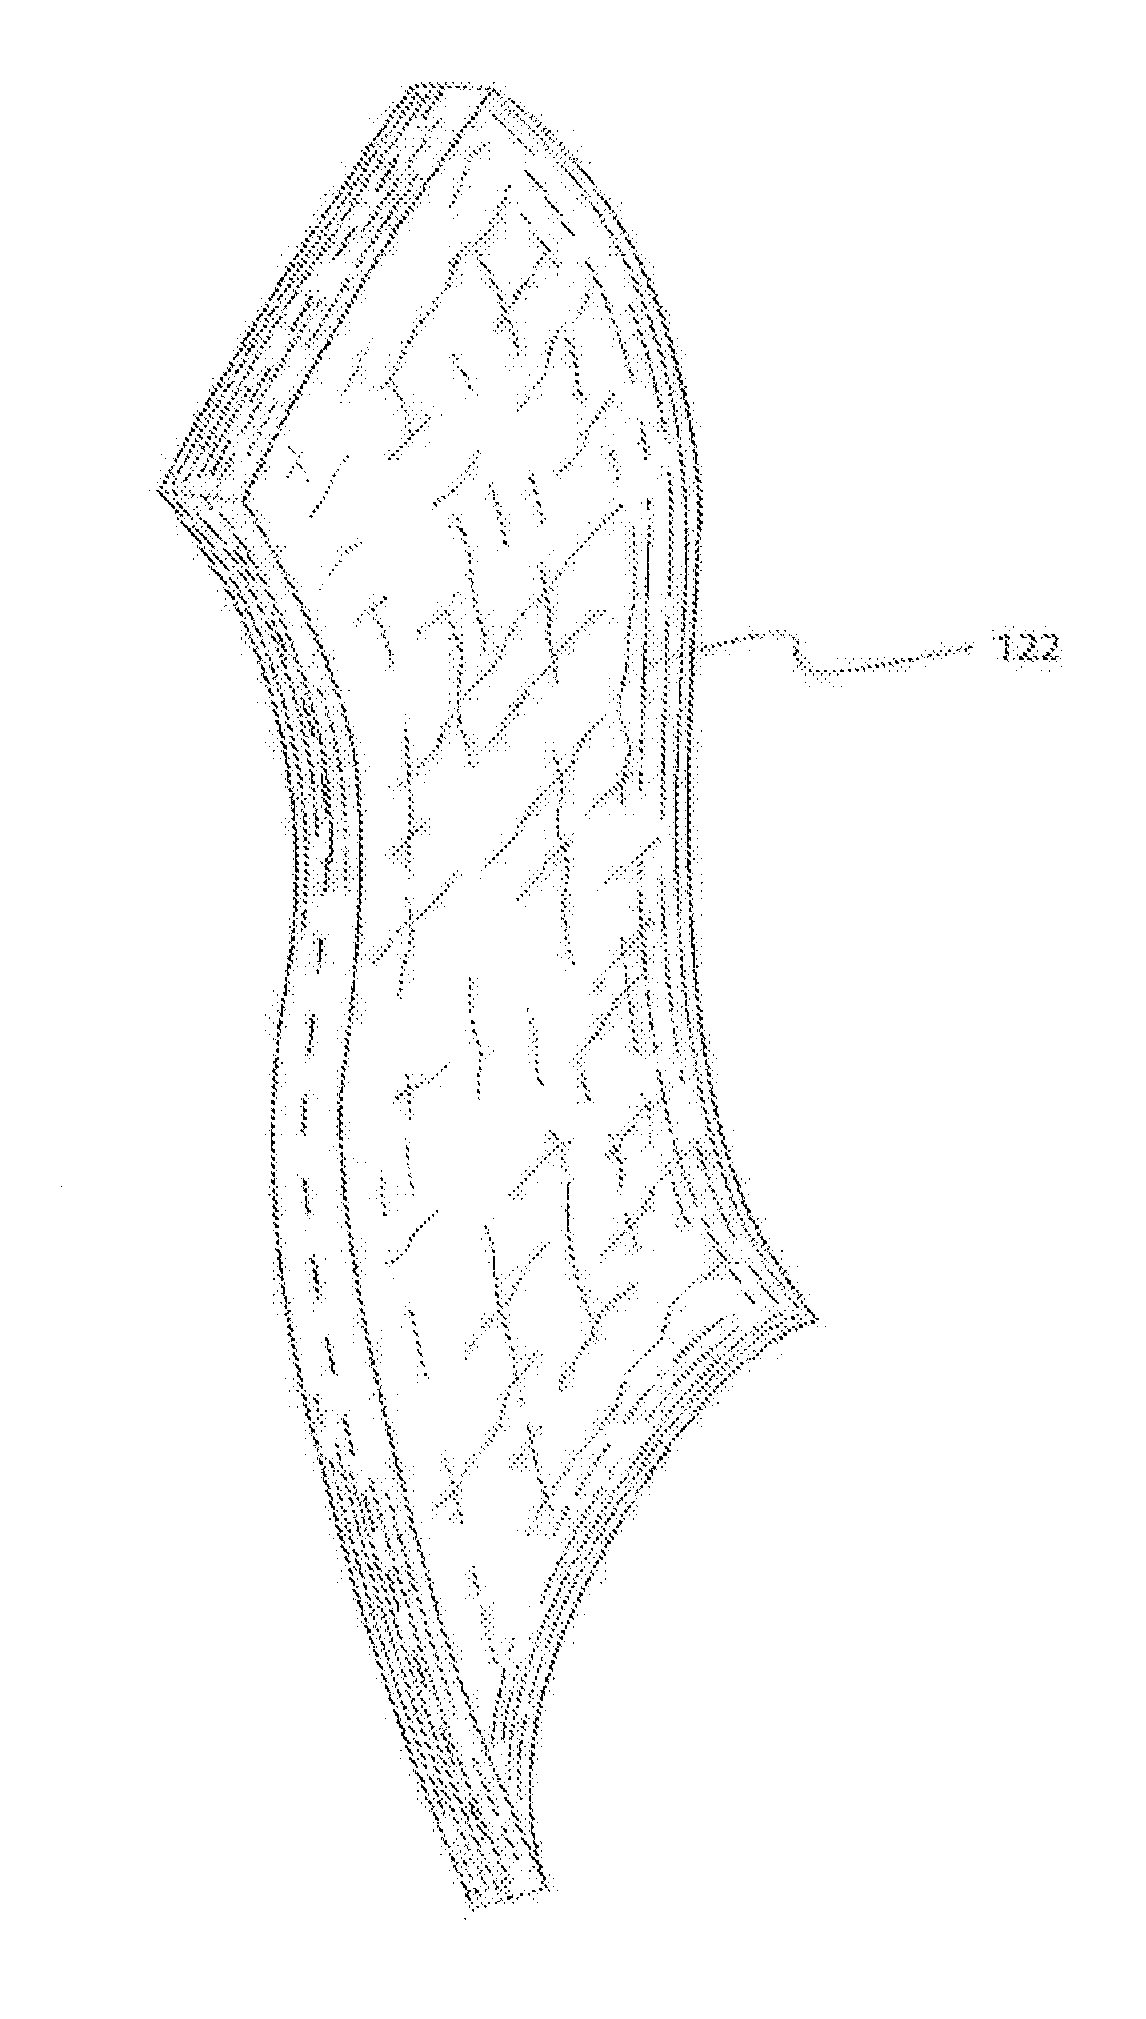 Method and devices for tissue expansion